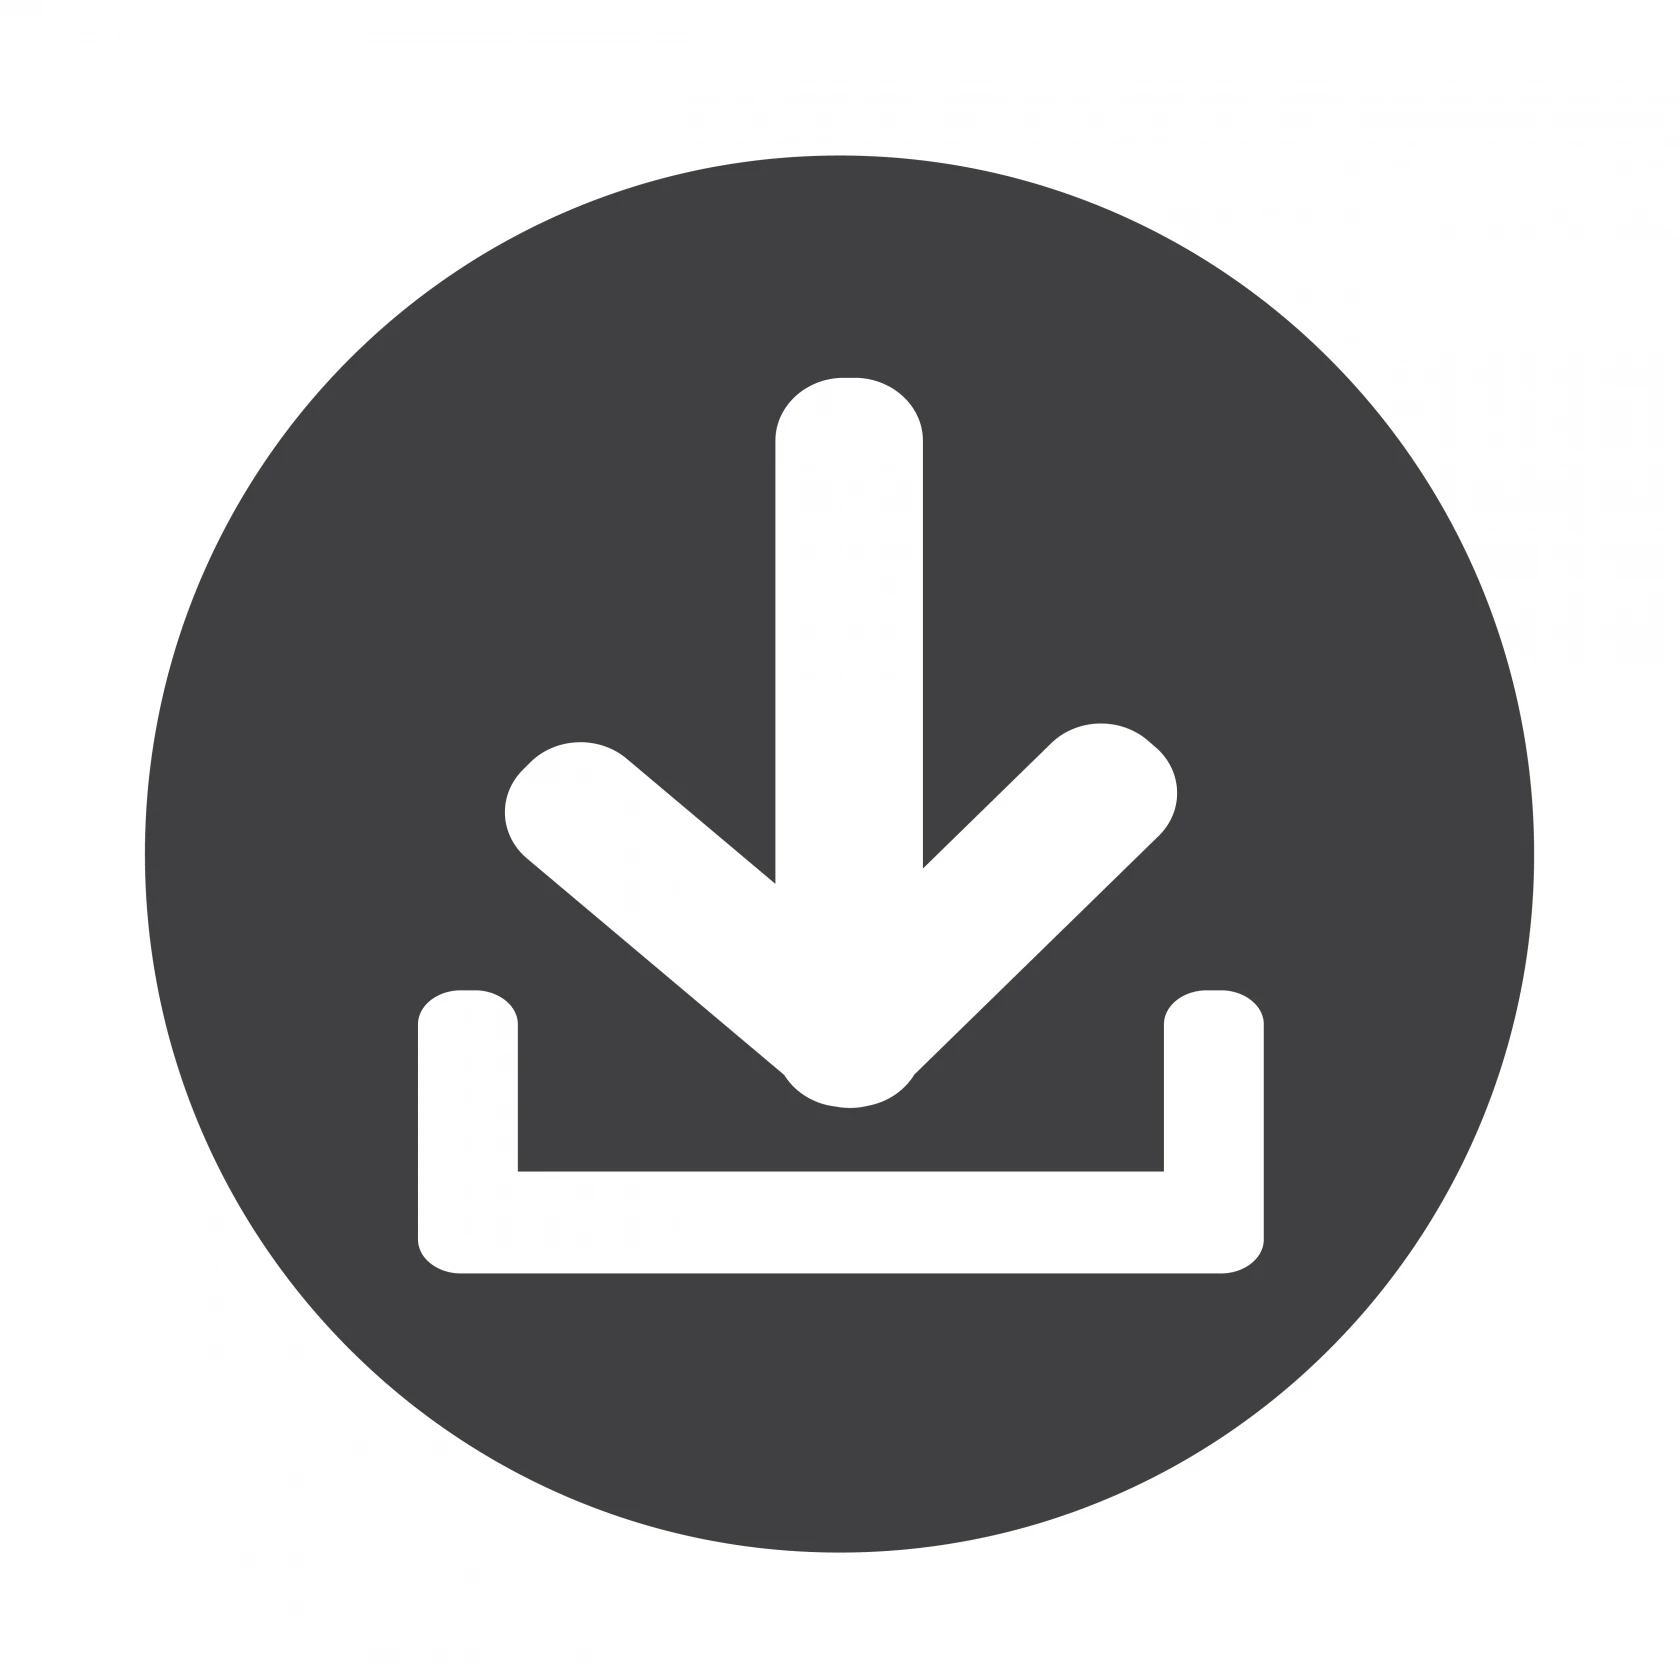 download-icon-upload-button-vector.webp